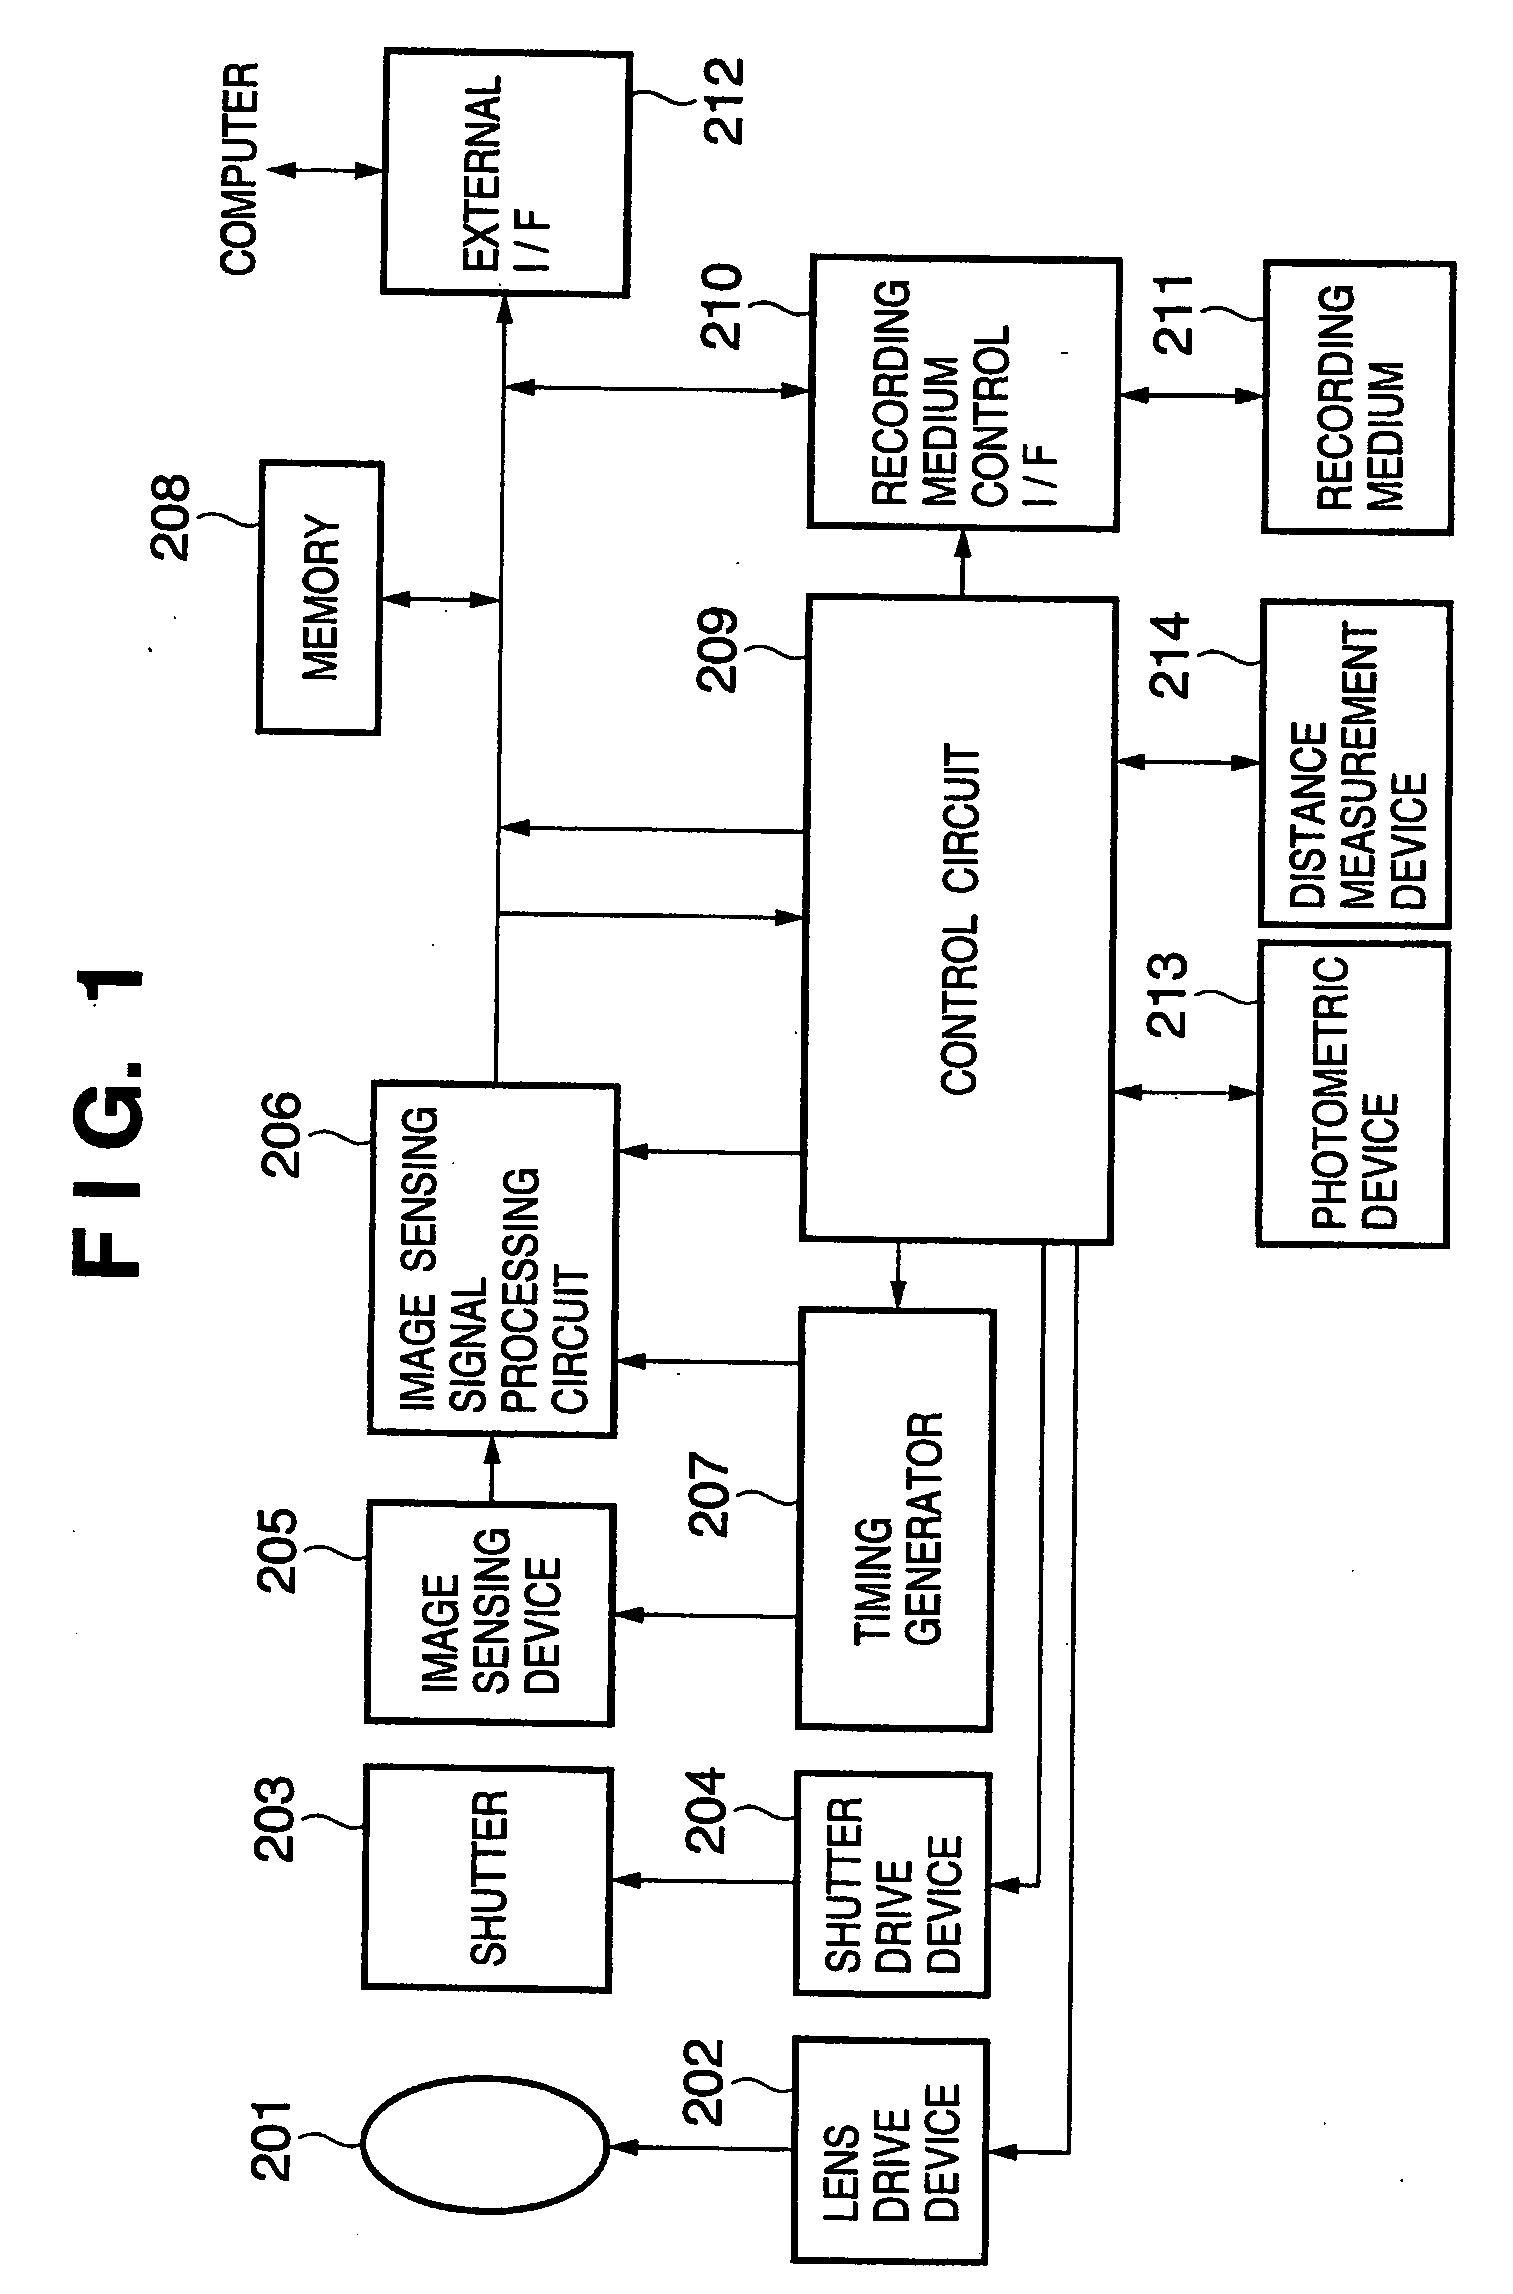 Image sensing device and control method therefor